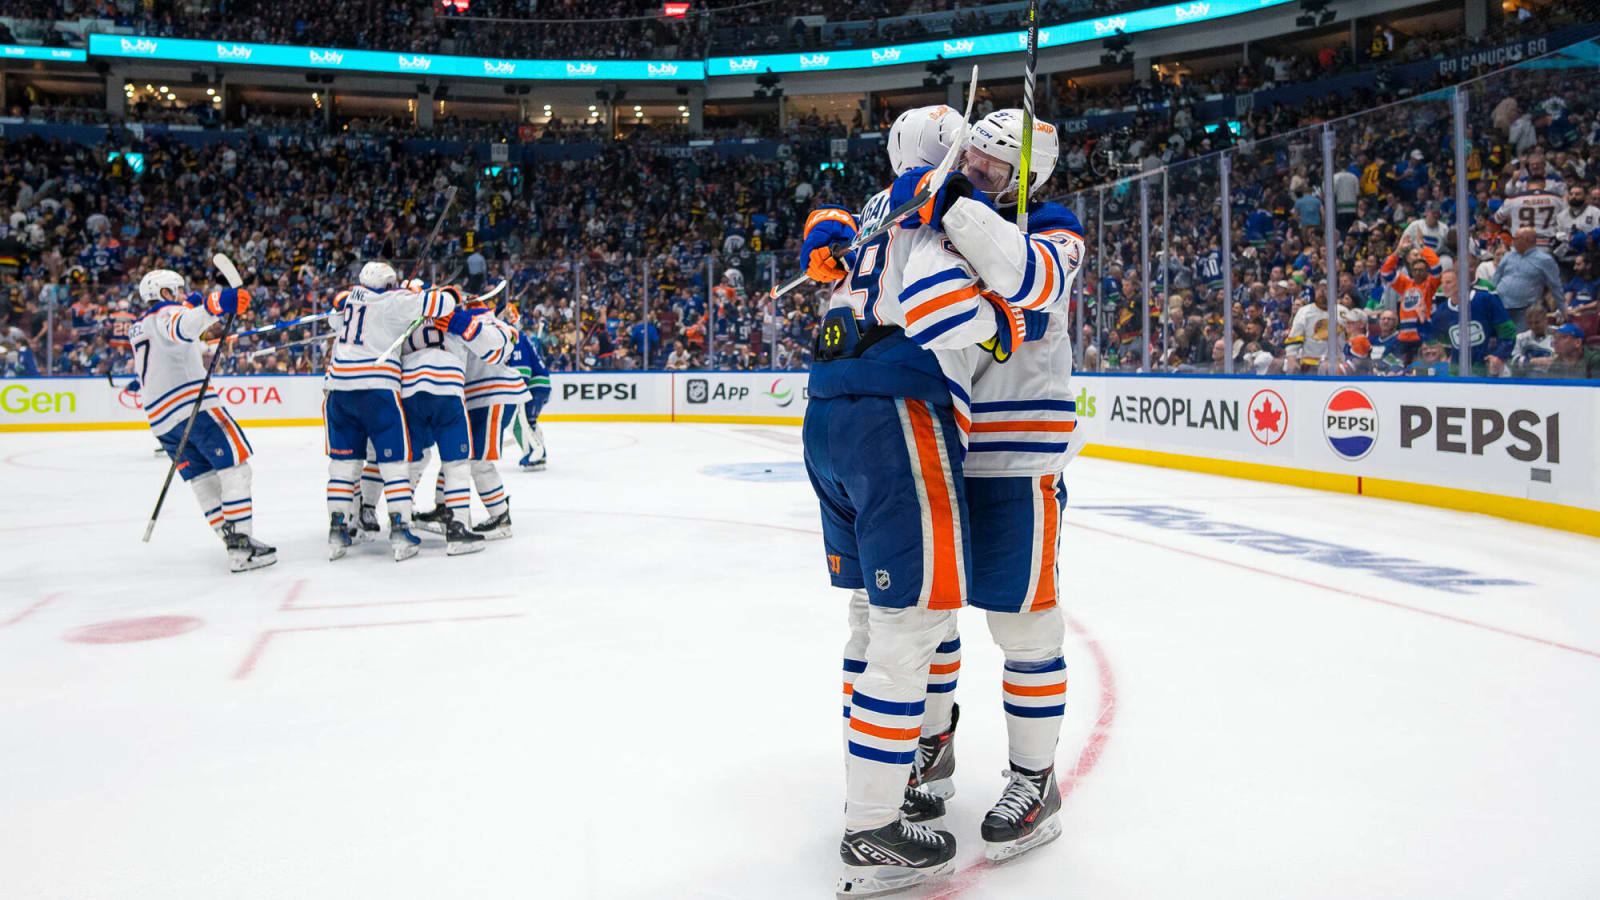  Storybook performances lift Oilers over Canucks